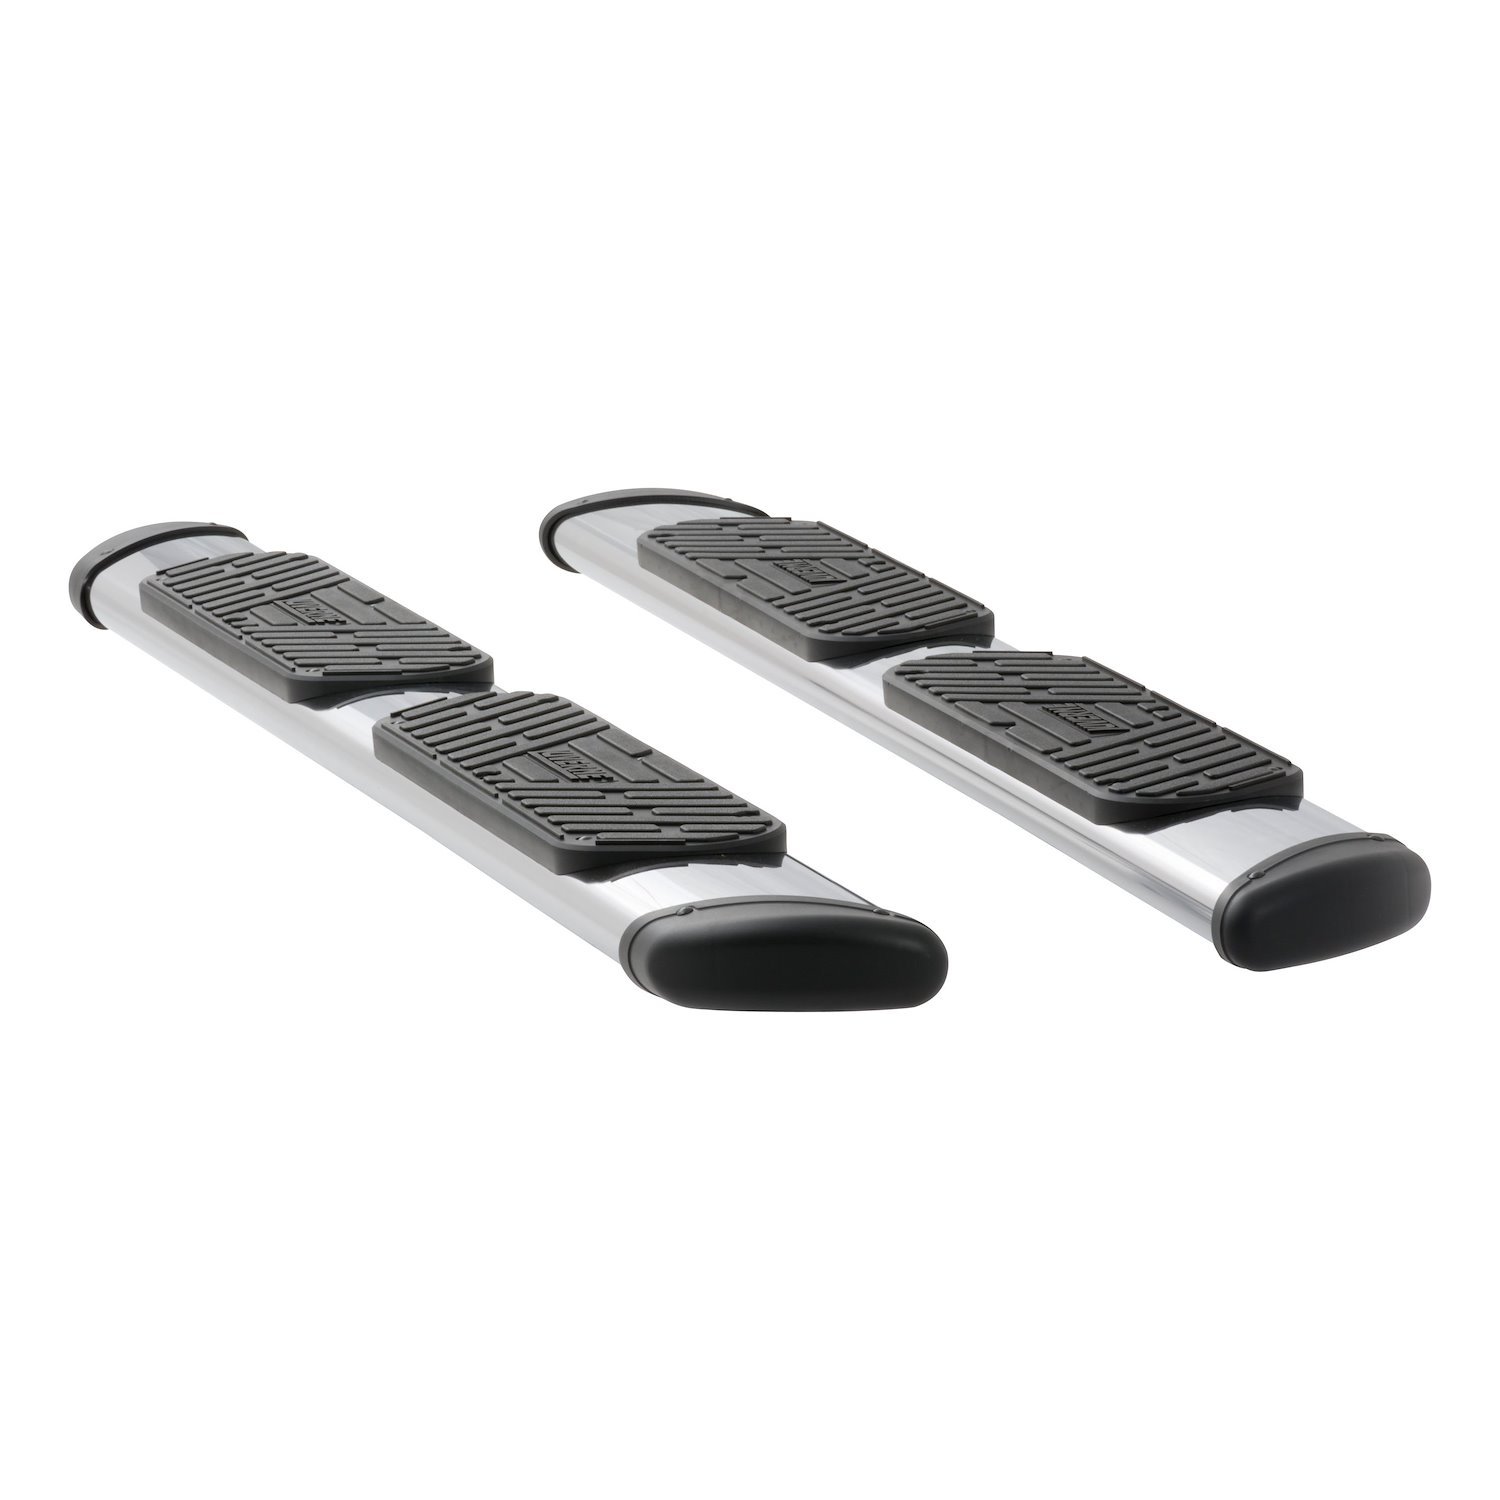 477078-401633 Regal 7 Polished Stainless 78 in. Oval Side Steps Fits Select Ram 1500 Quad Cab